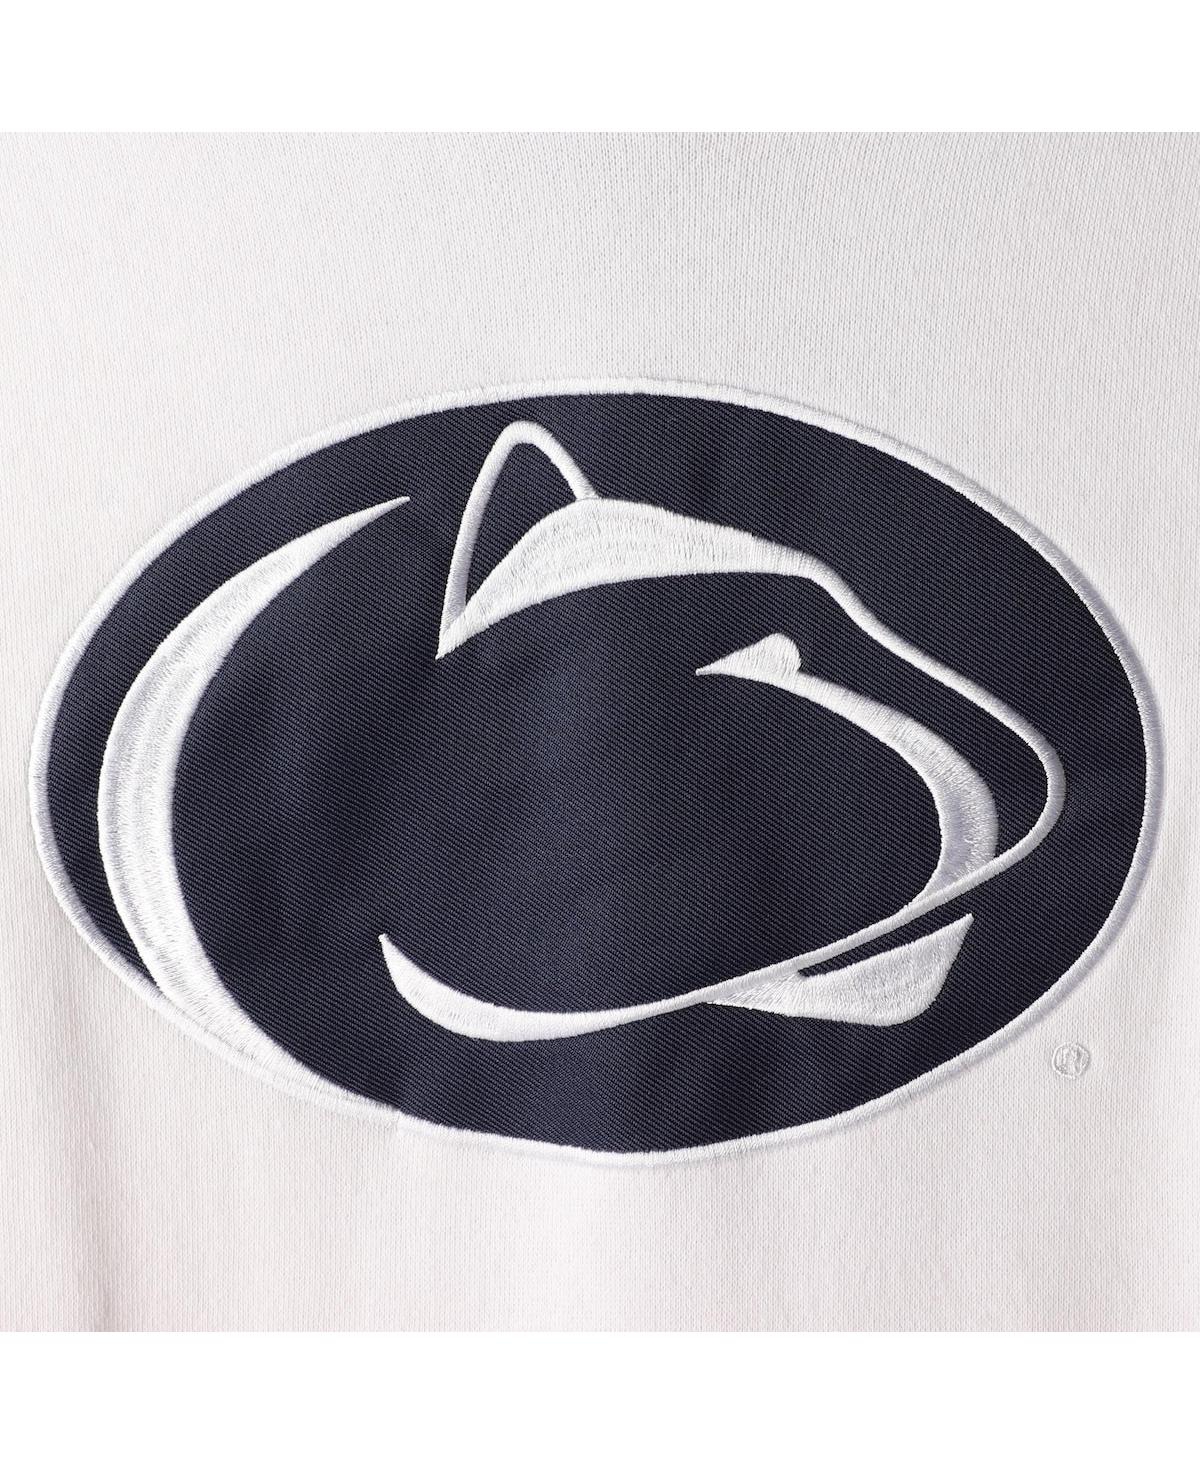 Shop Stadium Athletic Women's White Penn State Nittany Lions Team Big Logo Pullover Hoodie